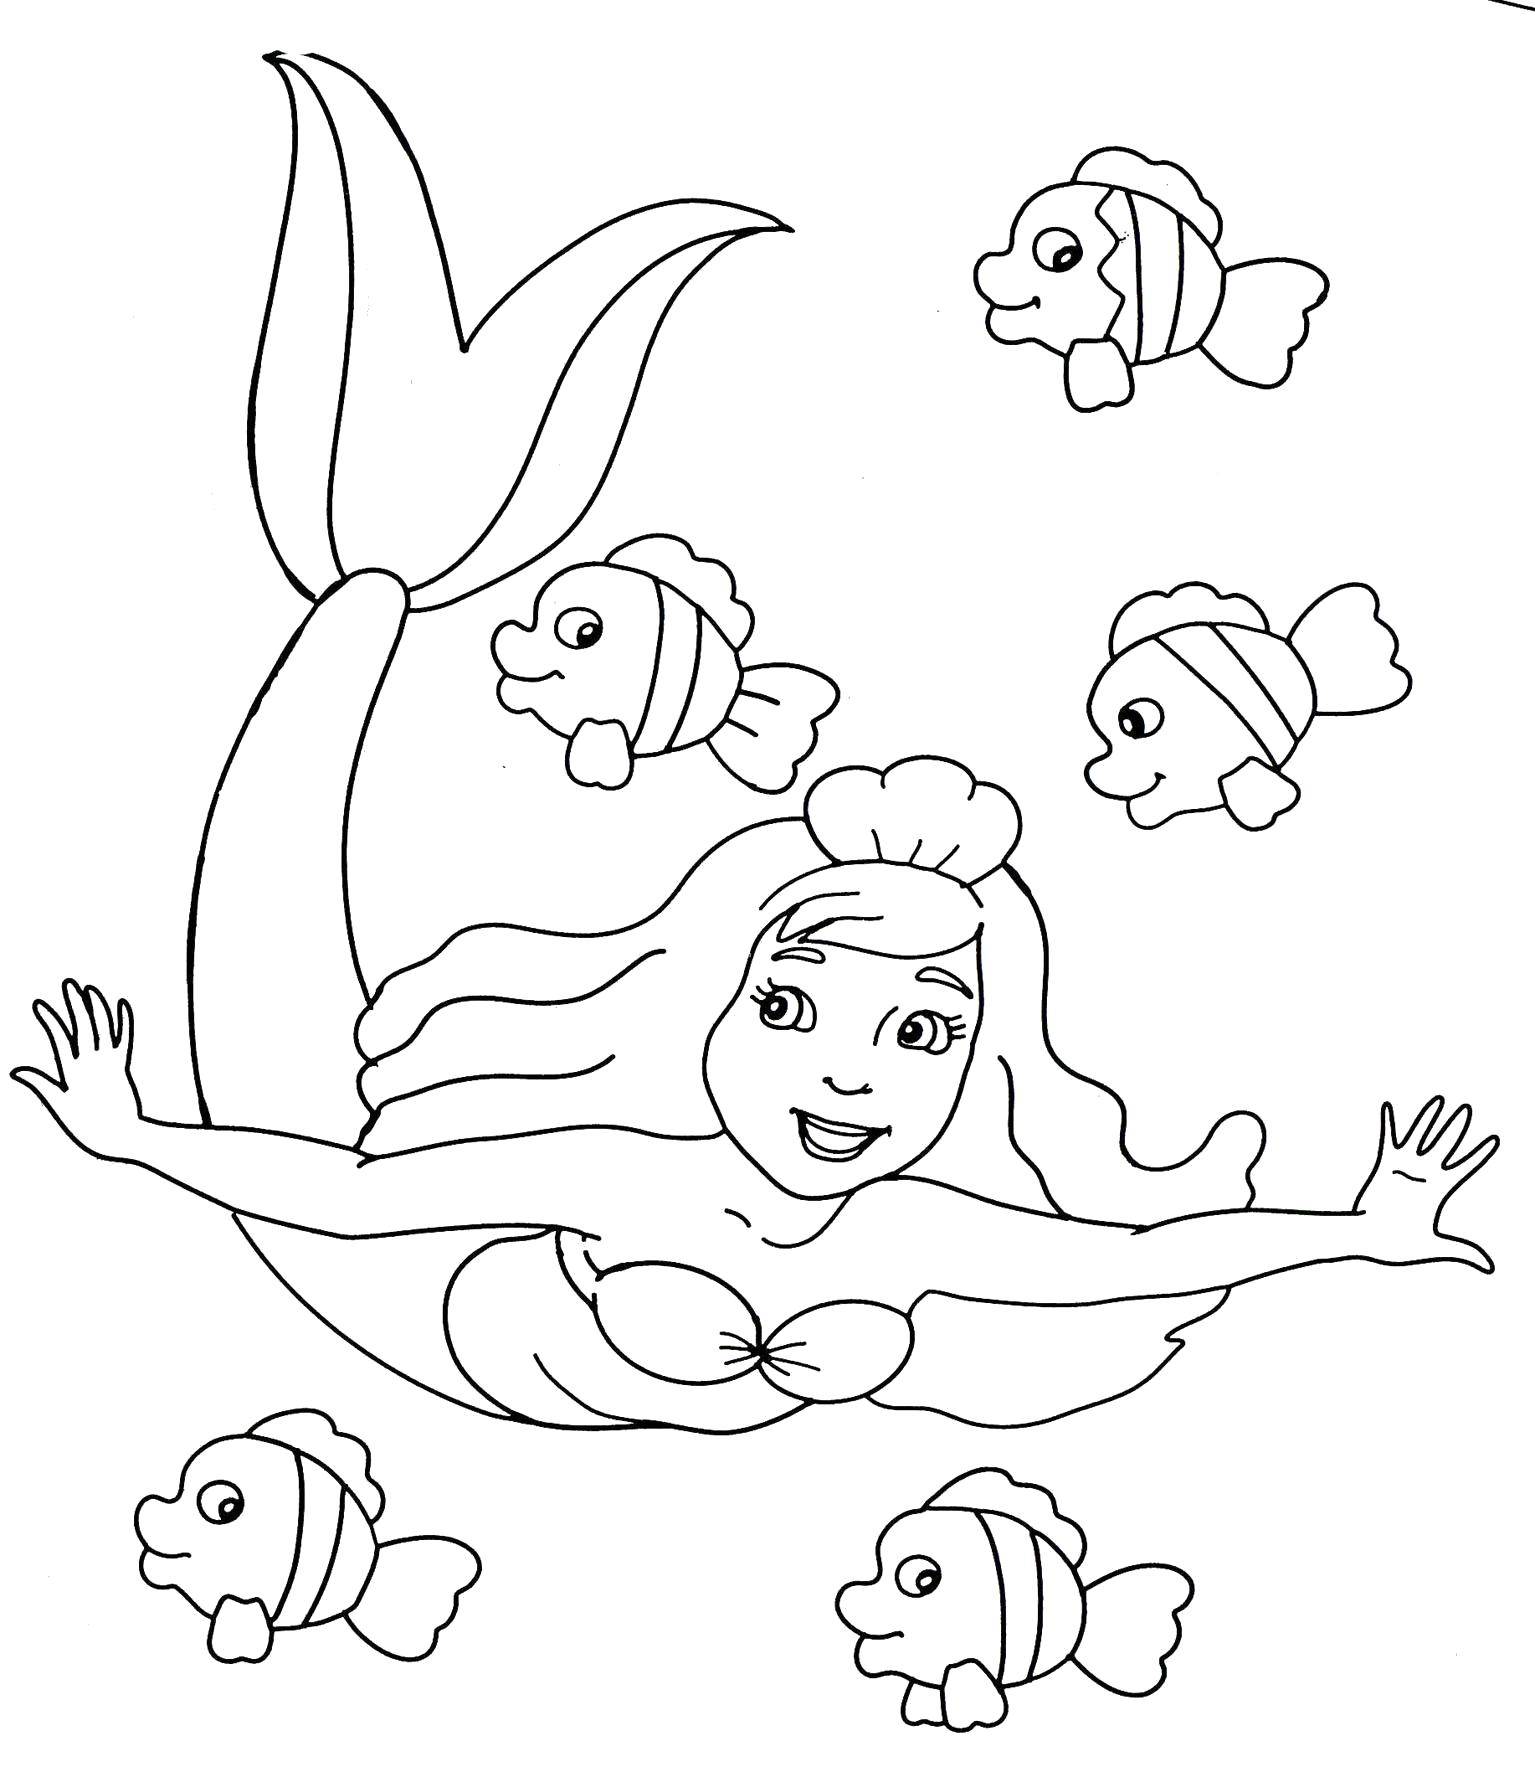 Coloring The little mermaid Ariel from the disney cartoon. Category Cartoon character. Tags:  Disney, the little mermaid, Ariel.